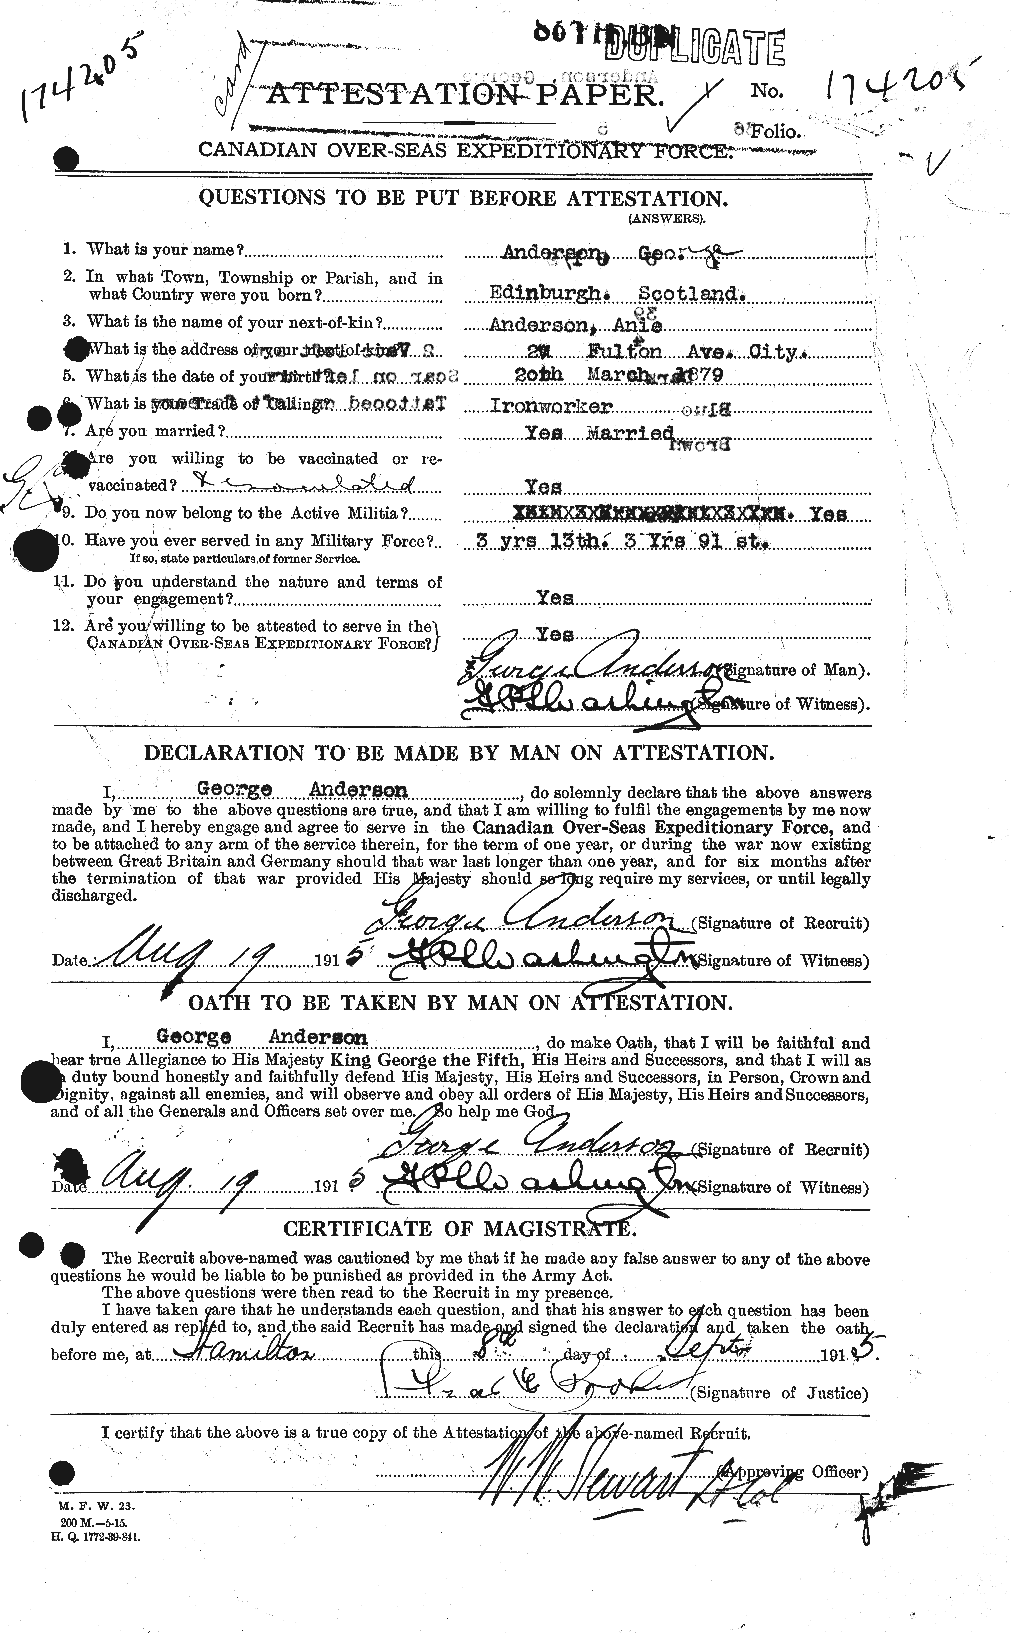 Personnel Records of the First World War - CEF 209752a